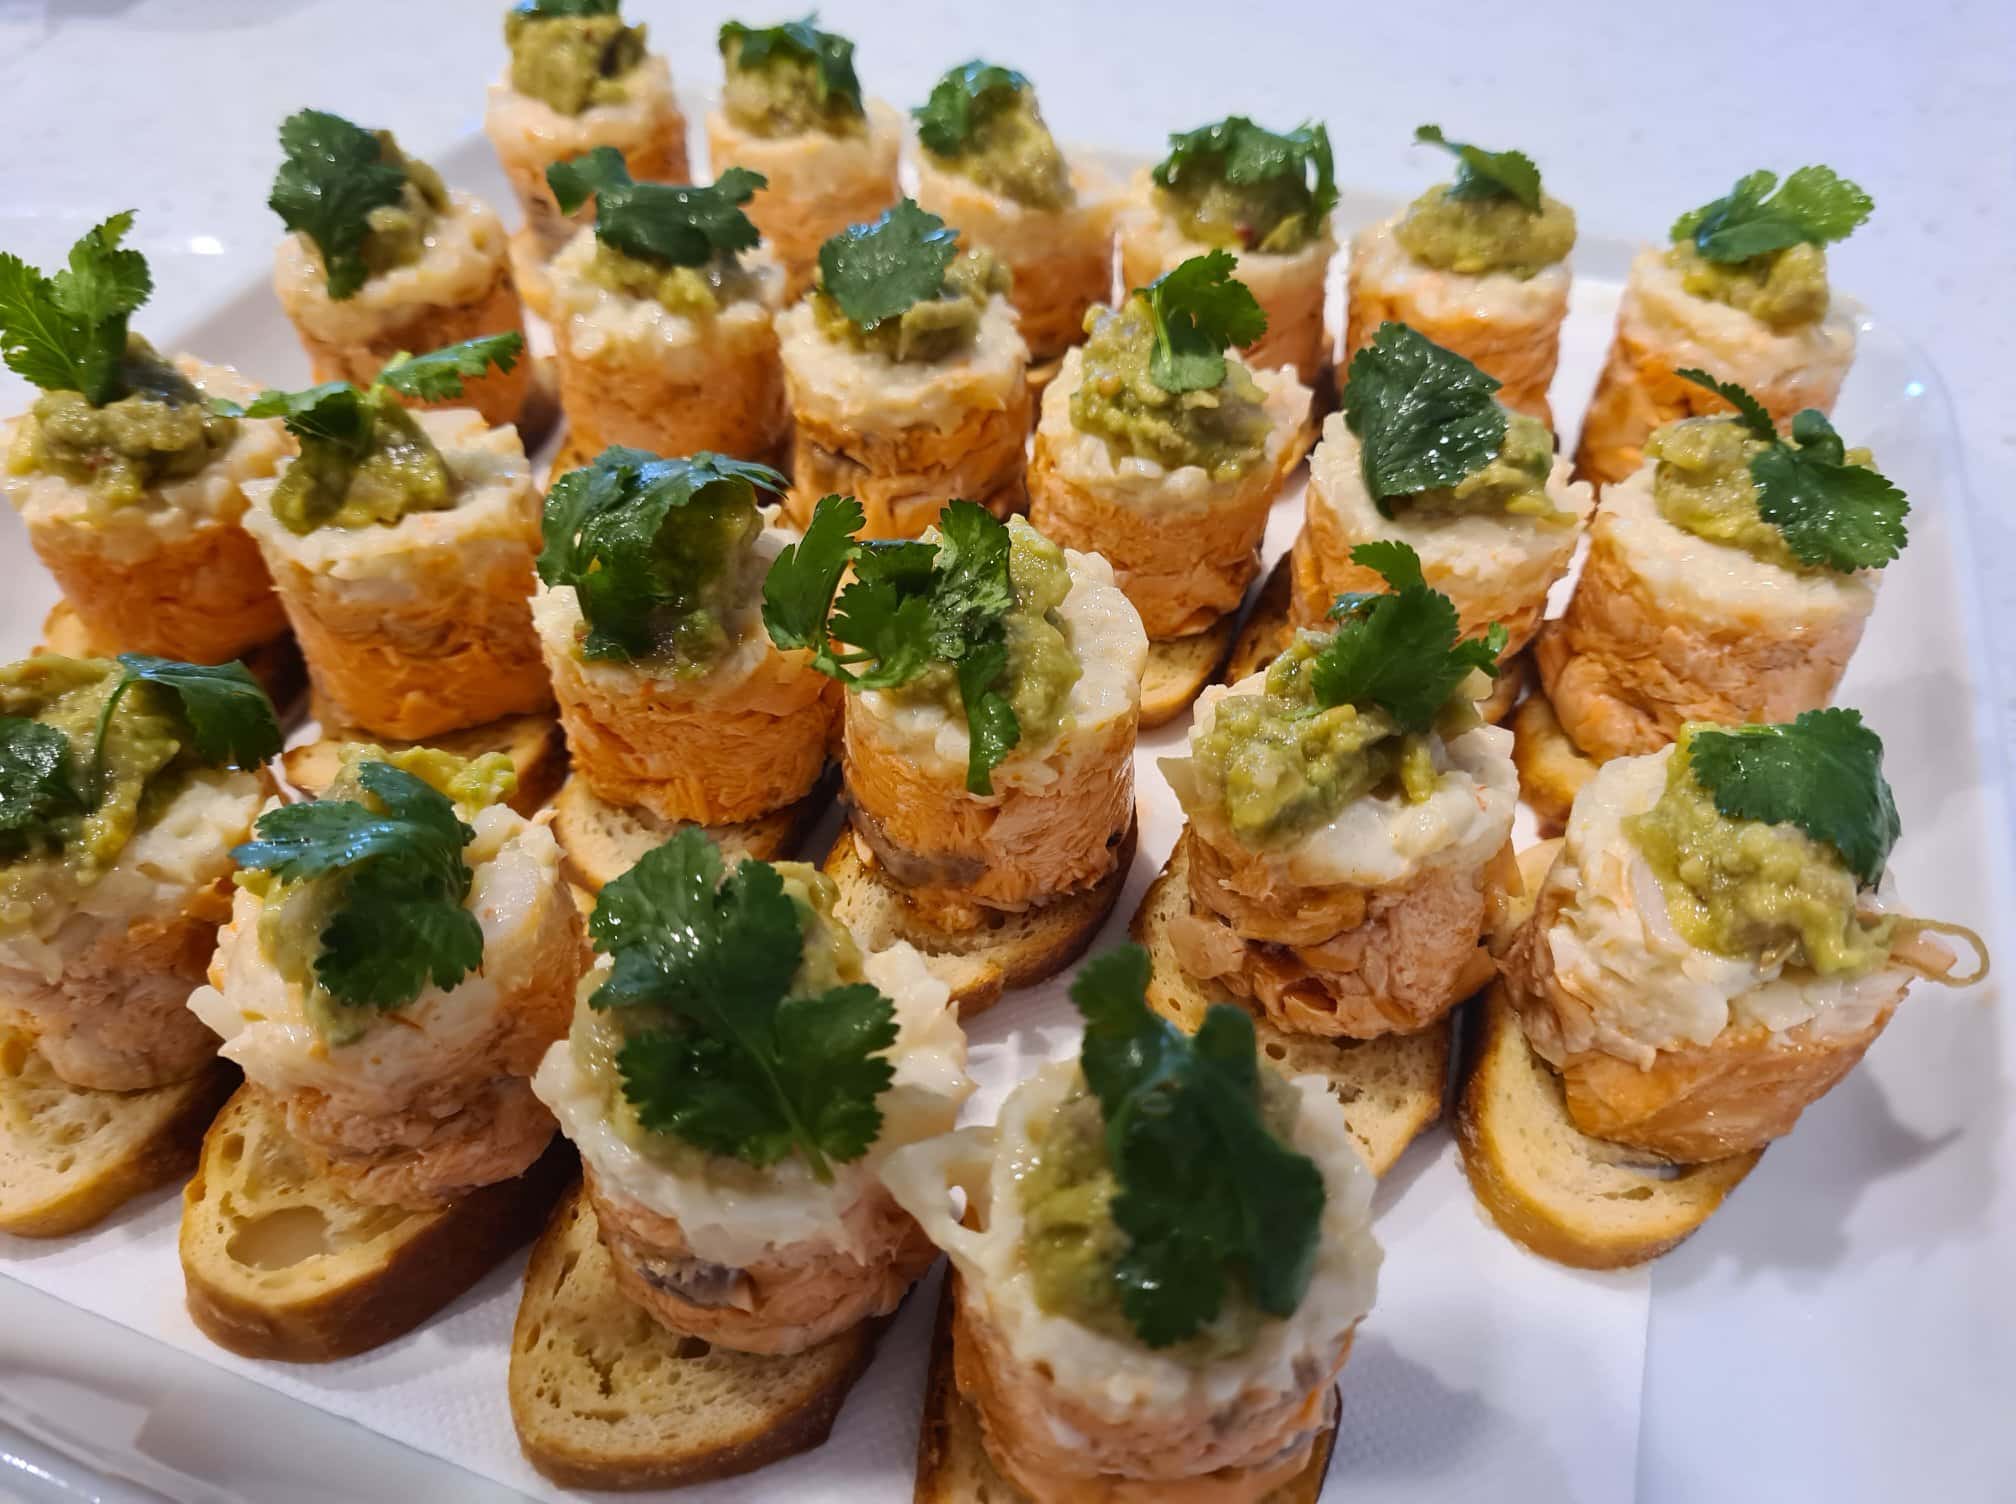 Culinary Lane Catering